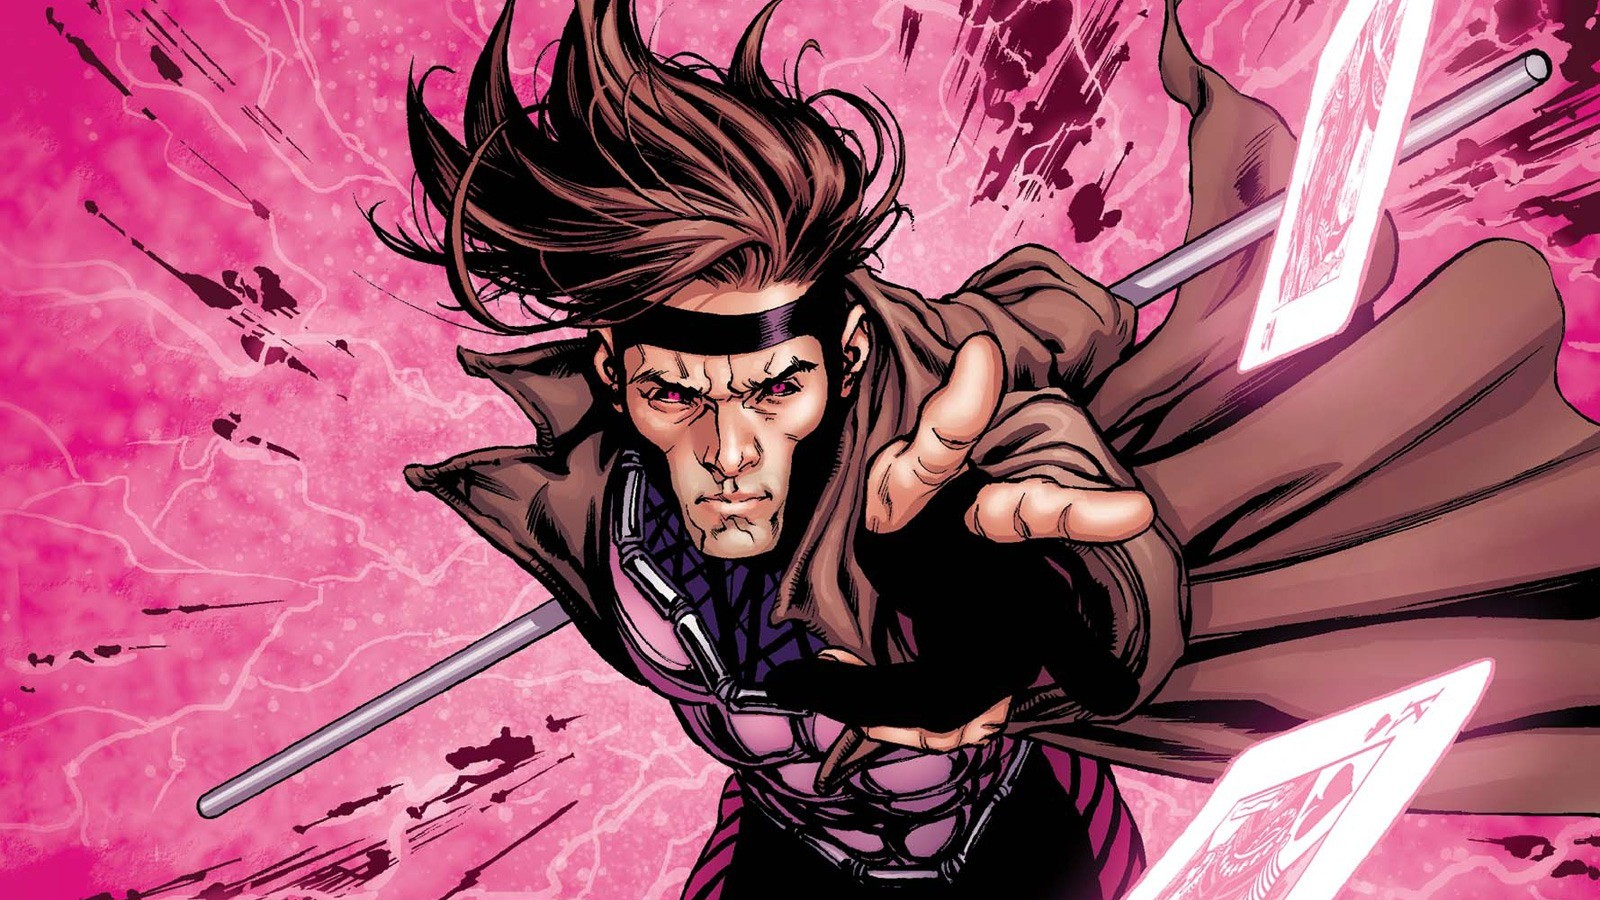 Marvel's Midnight Suns devs considered 25 different heroes, including  Gambit